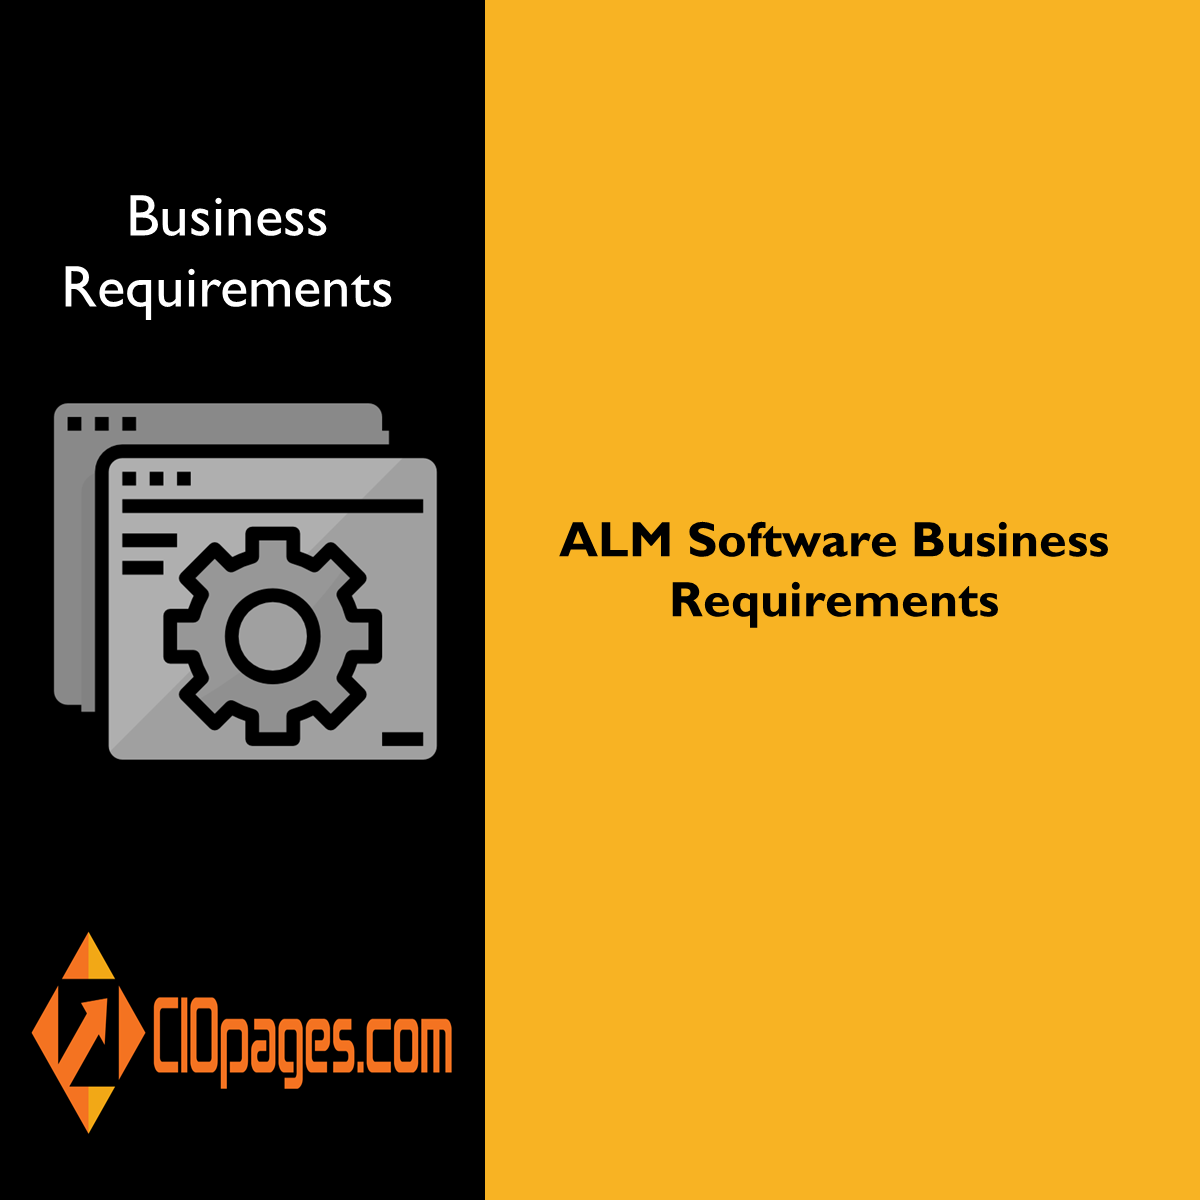 ALM Software Business Requirements